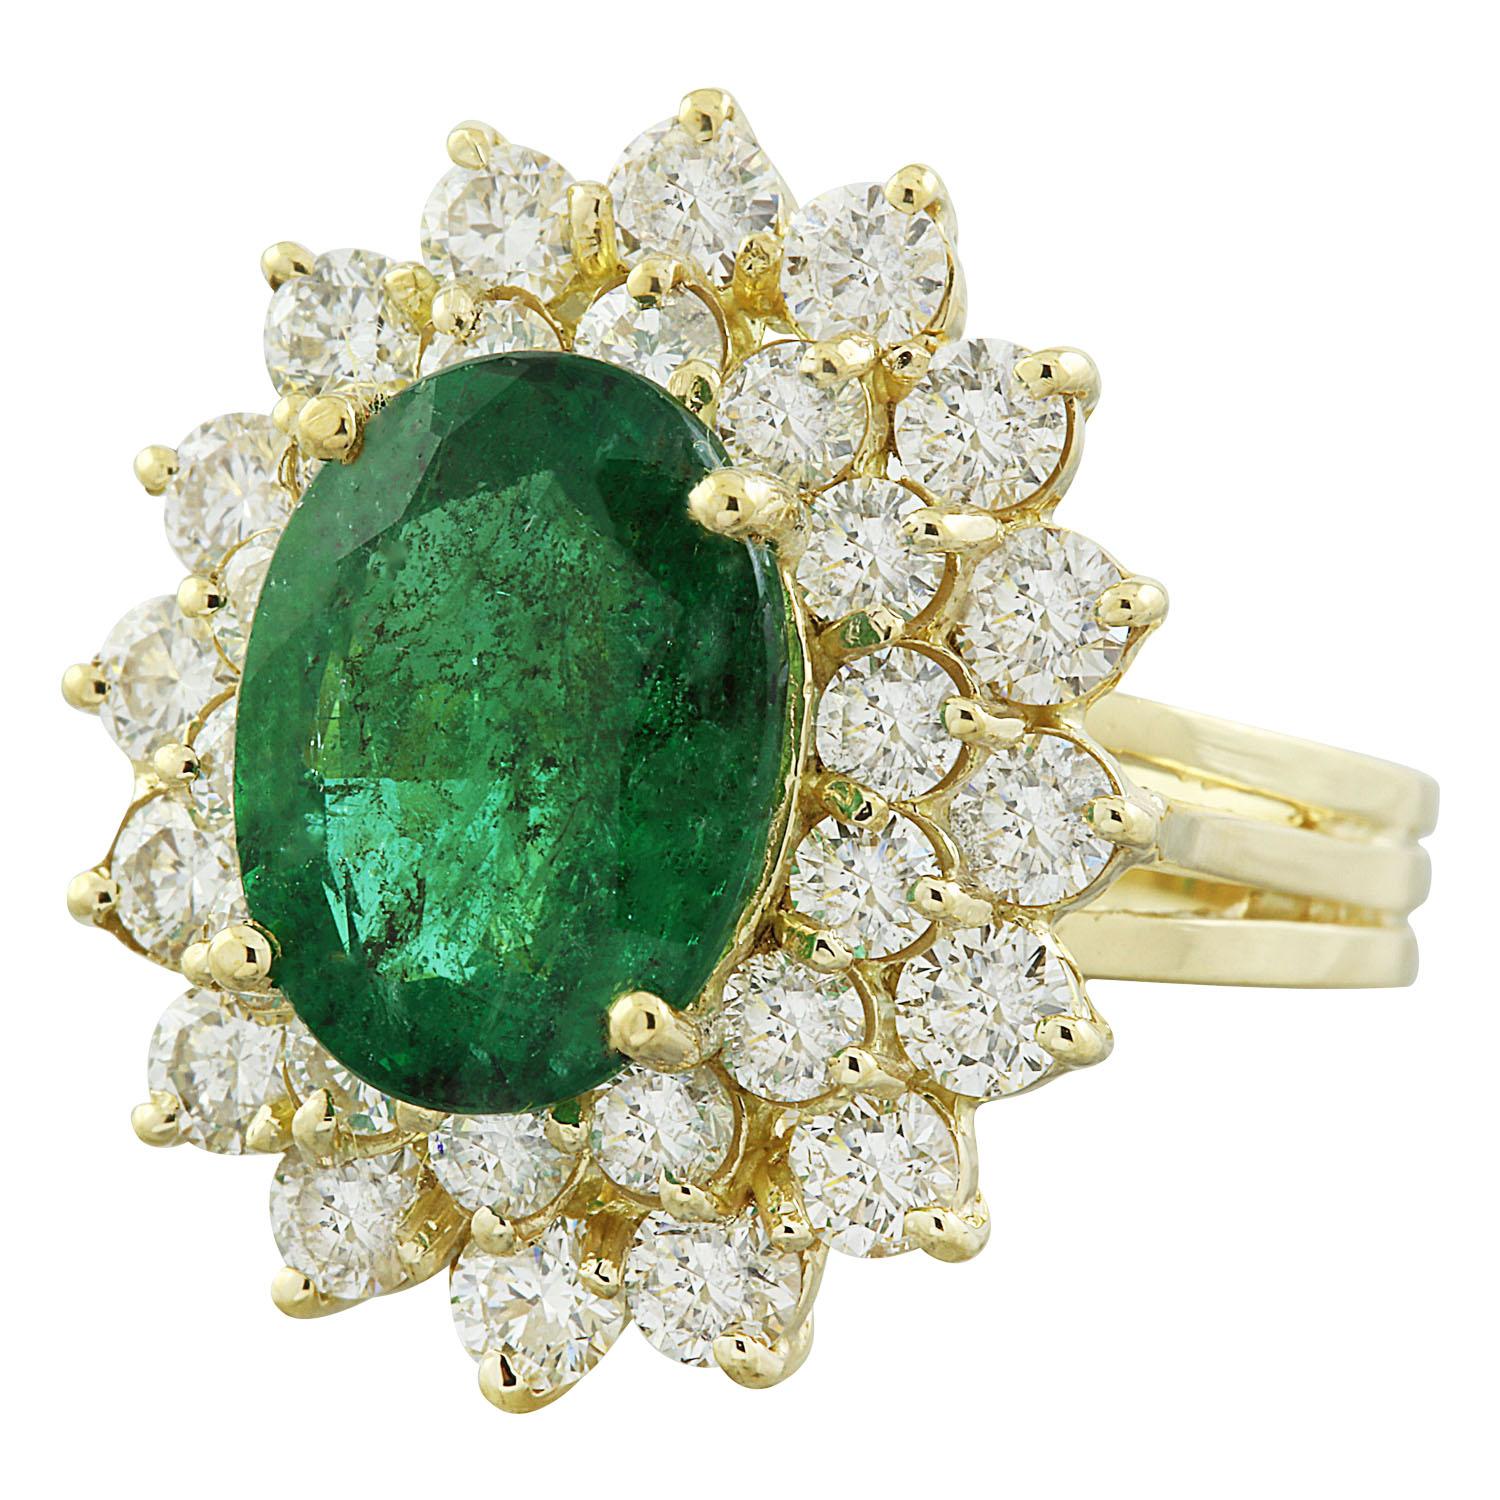 7.10 Carat Natural Emerald 14 Karat Solid Yellow Gold Diamond Ring
Stamped: 14K 
Total Ring Weight: 9.8 Grams
Emerald Weight 4.60 Carat (12.00x10.00 Millimeters)
Diamond Weight: 2.50 carat (F-G Color, VS2-SI1 Clarity )
Face Measures: 22.45x19.35